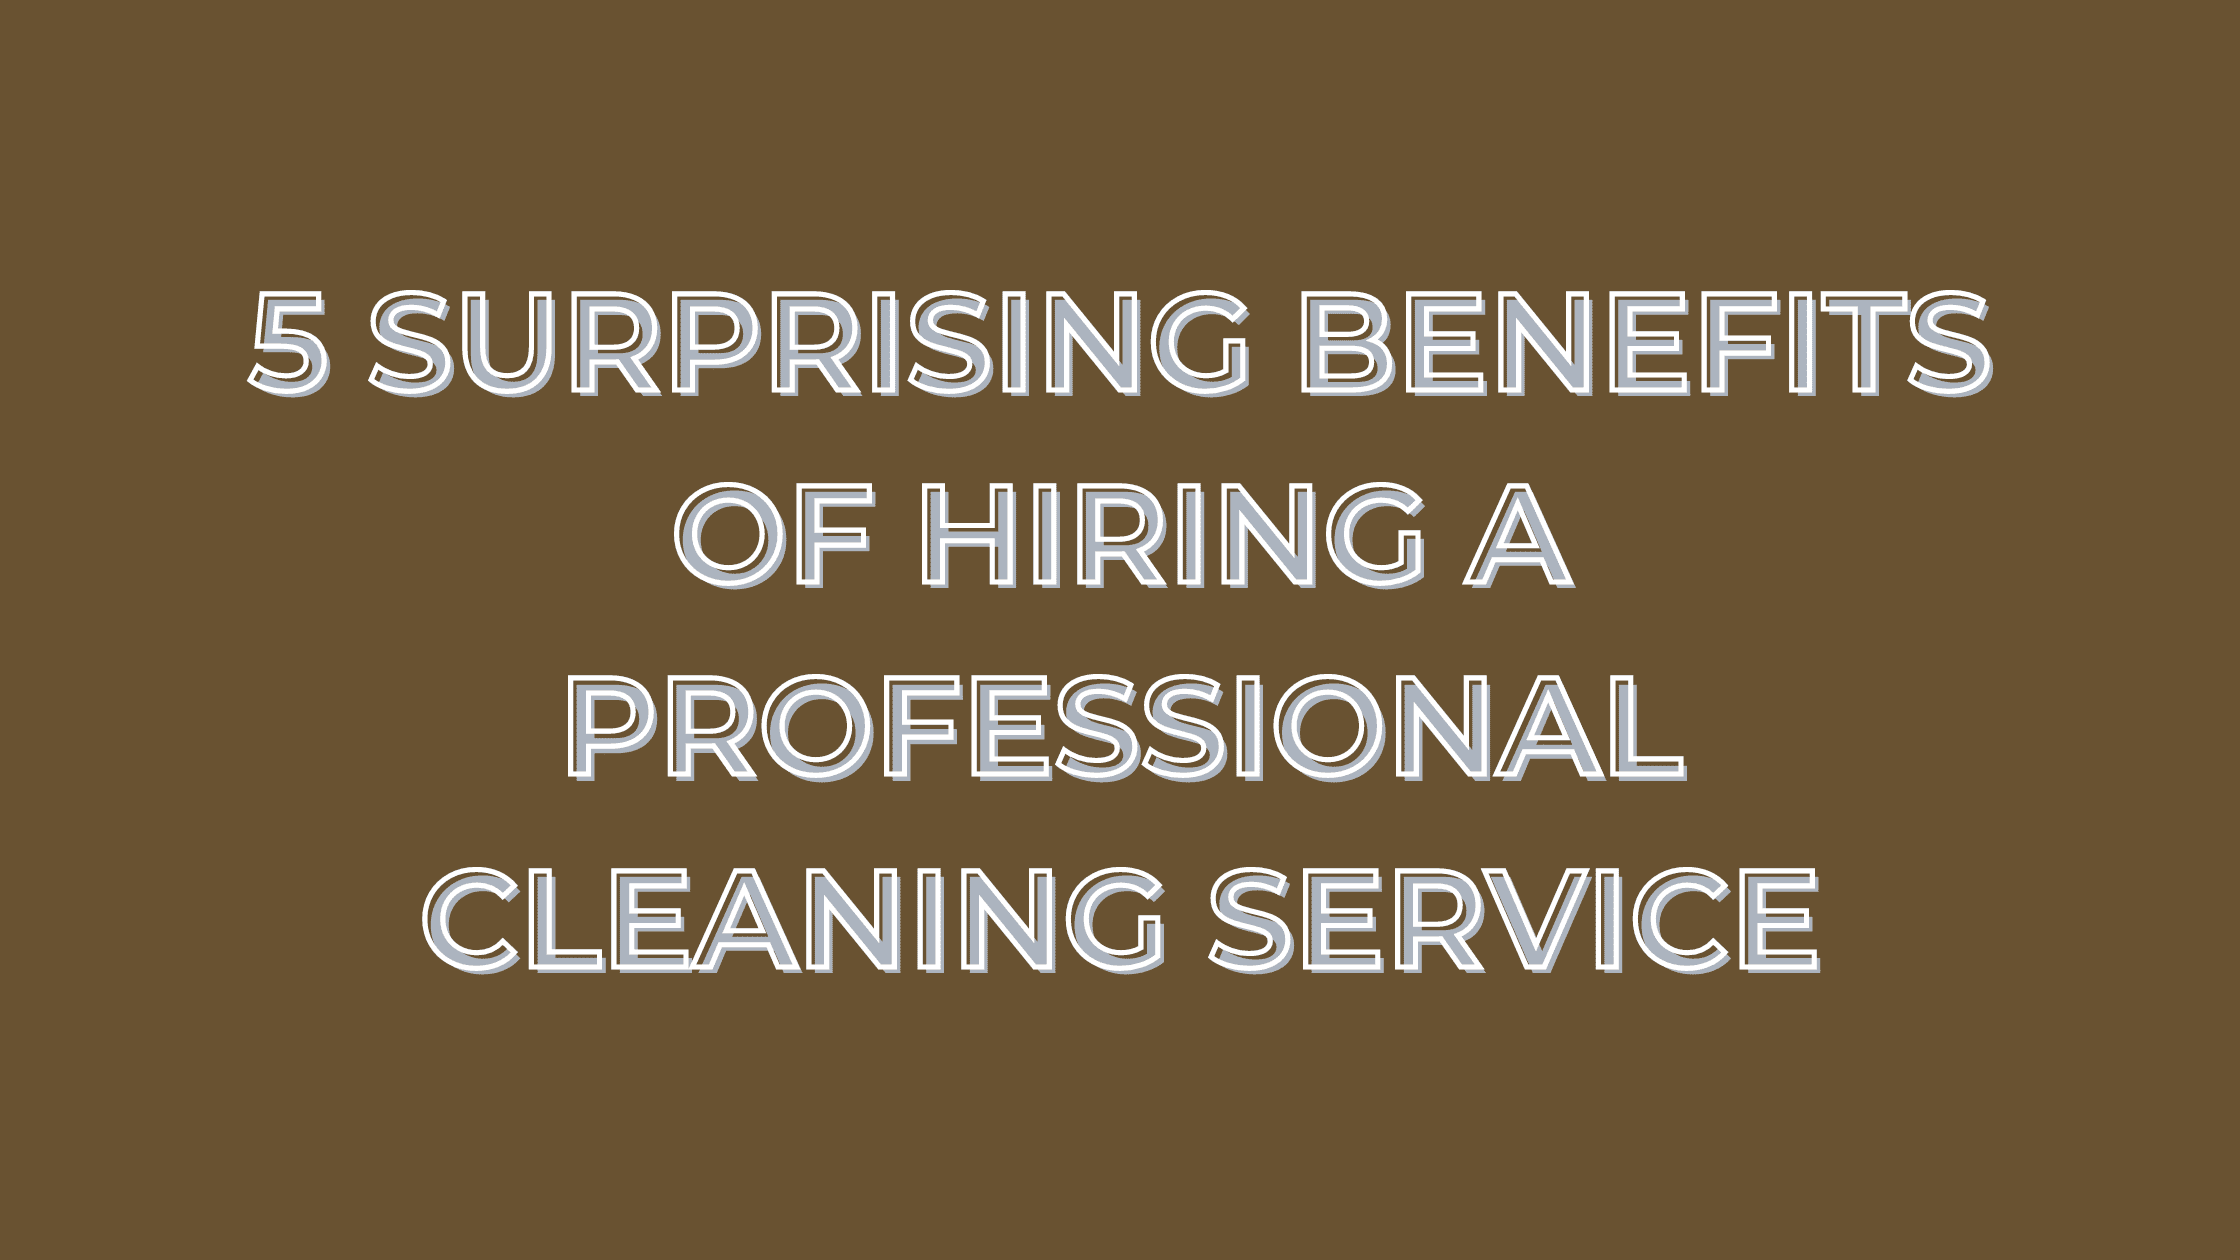 5 Surprising Benefits of Hiring a Professional Cleaning Service (1)